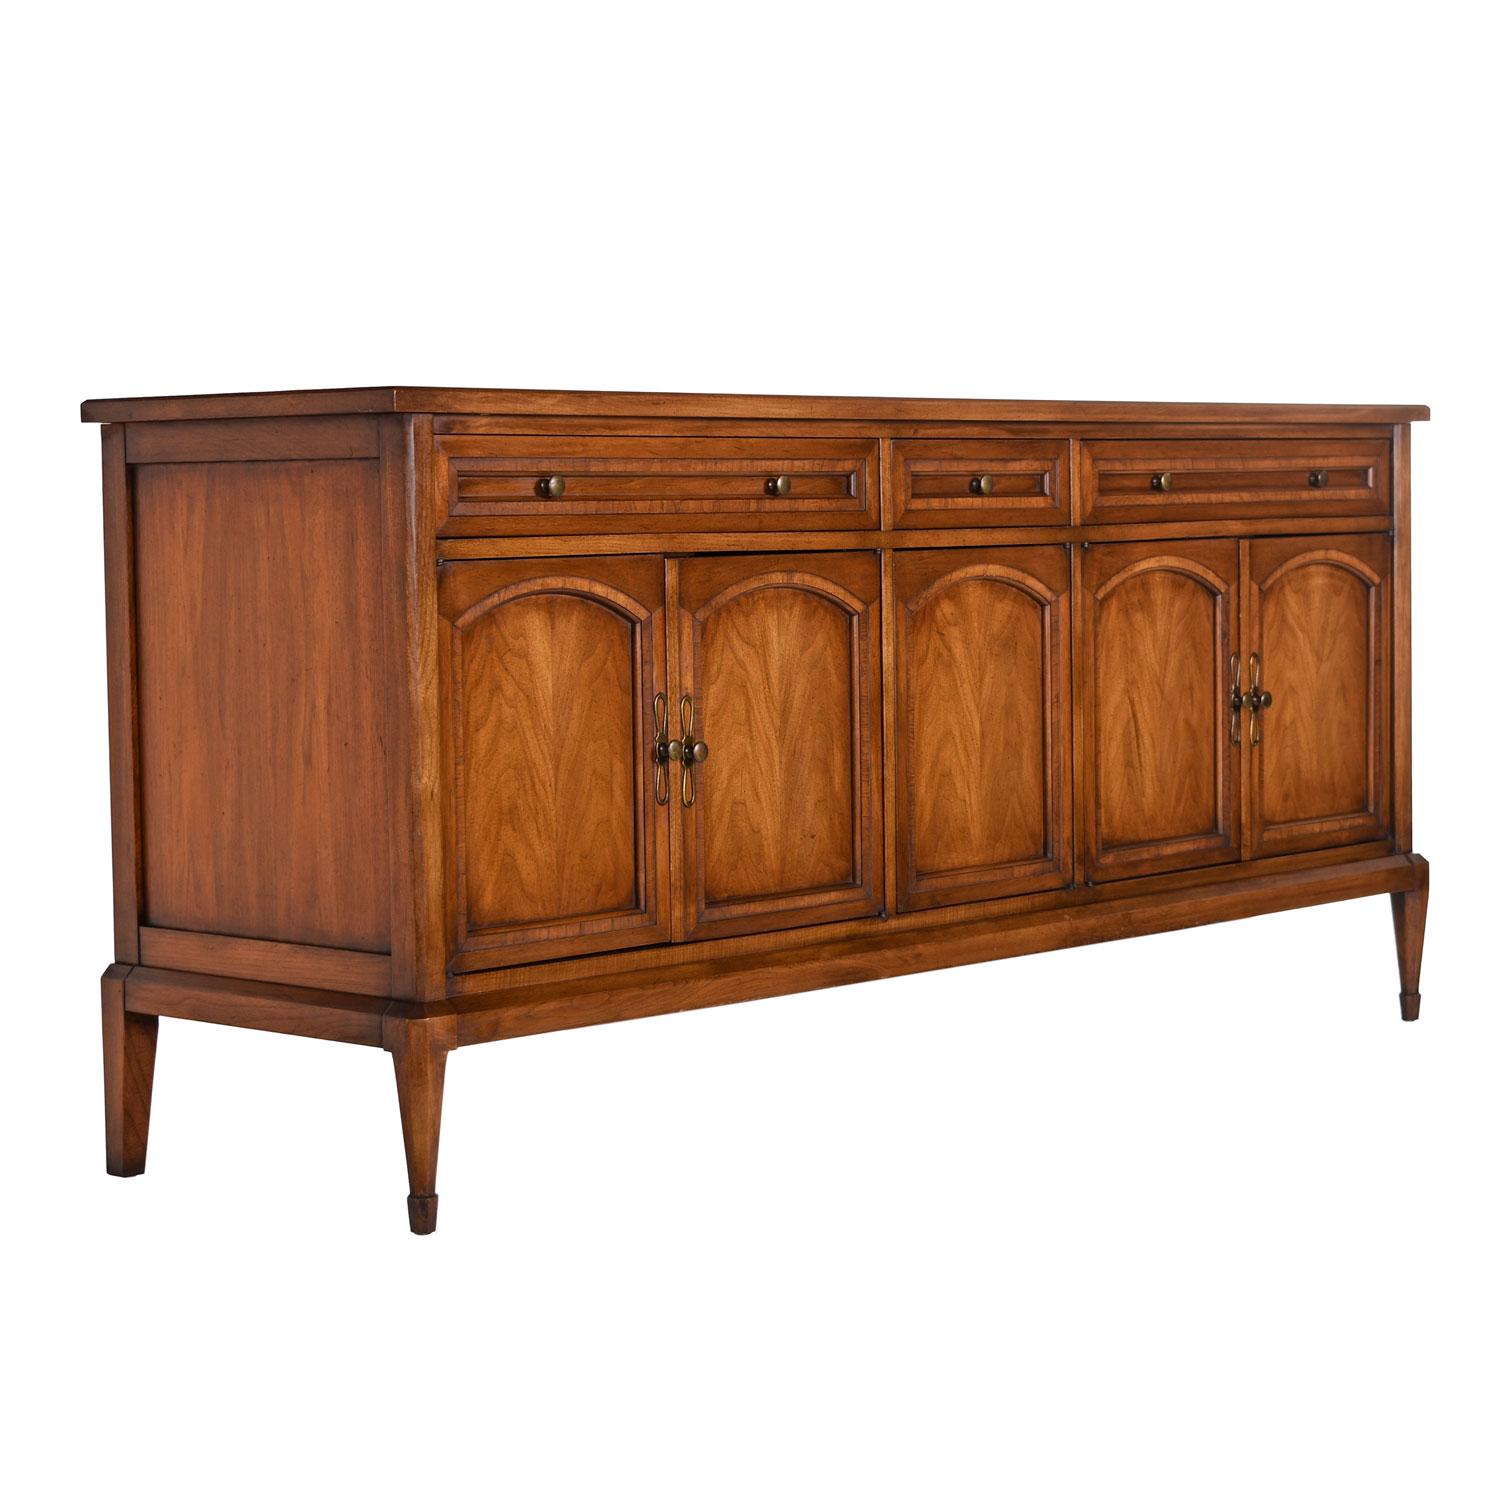 Midcentury walnut brass credenza sideboard by White Fine Furniture Company, circa 1968 from their Cosmopolitan line. Made of solid walnut wood with a fly speck finish. We lovingly and respectfully refer to this more traditional style as mid-century